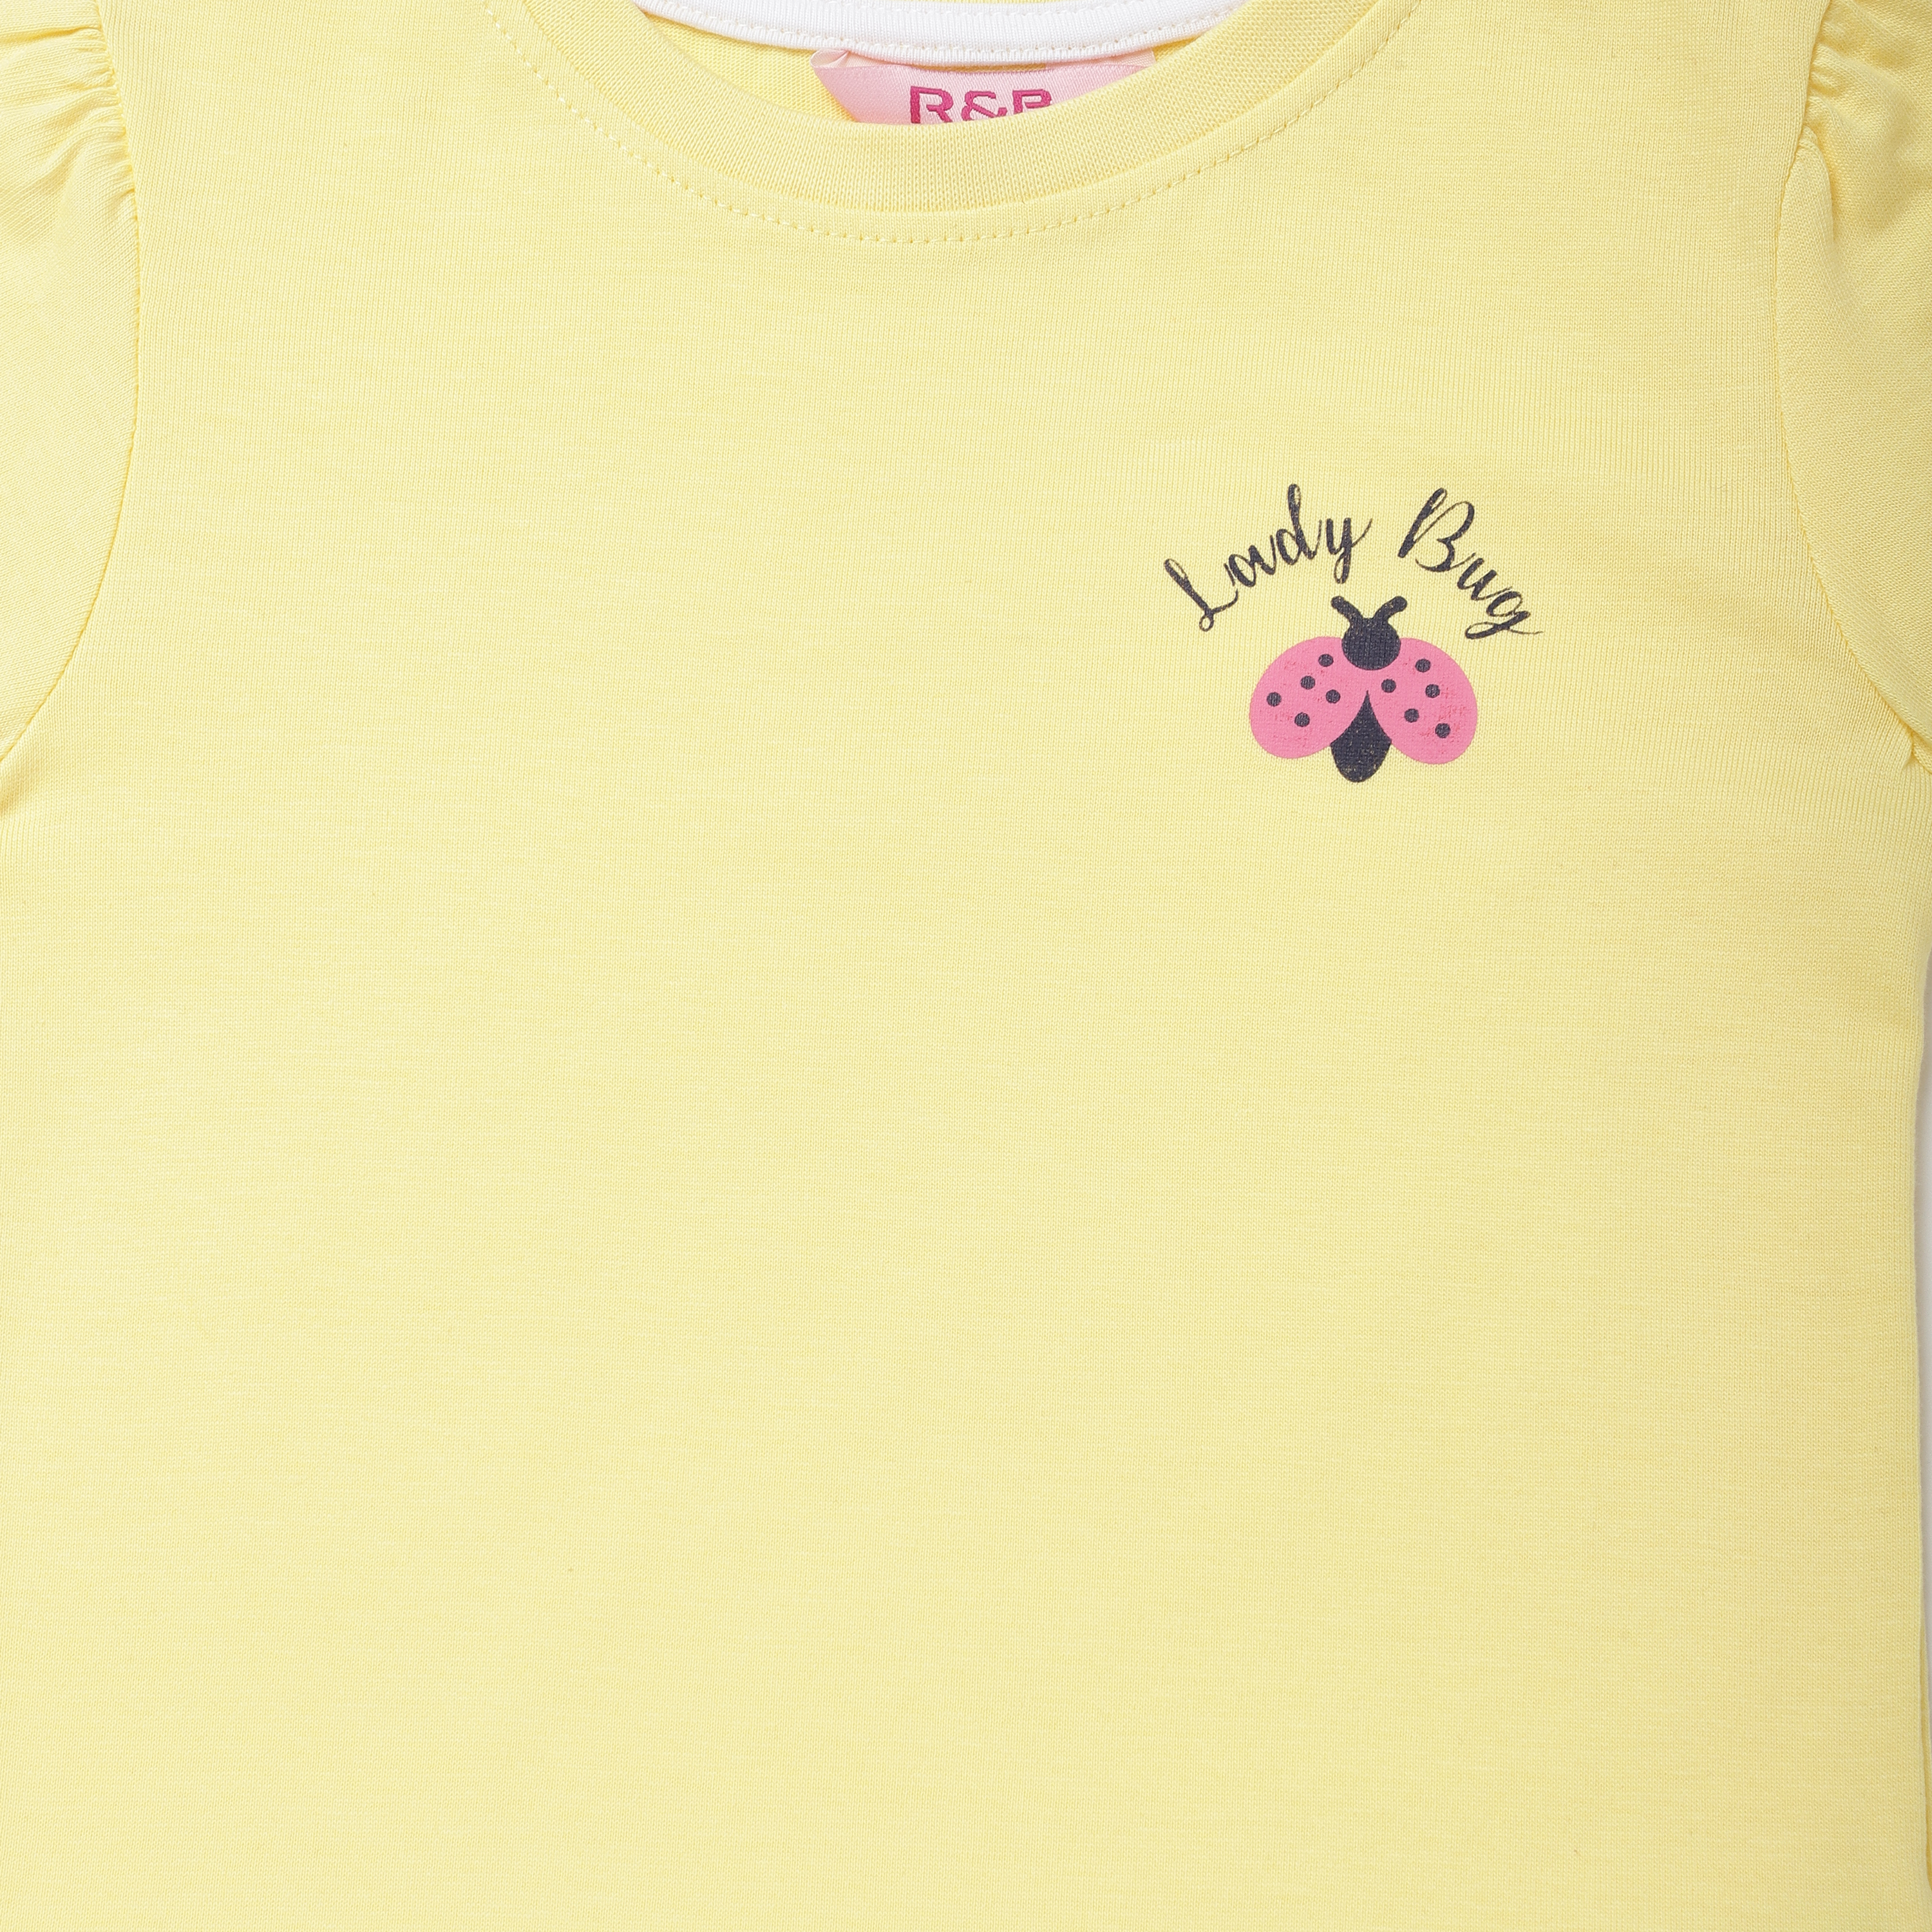 R&B Girls T-Shirt (Pack of 2) image number 3